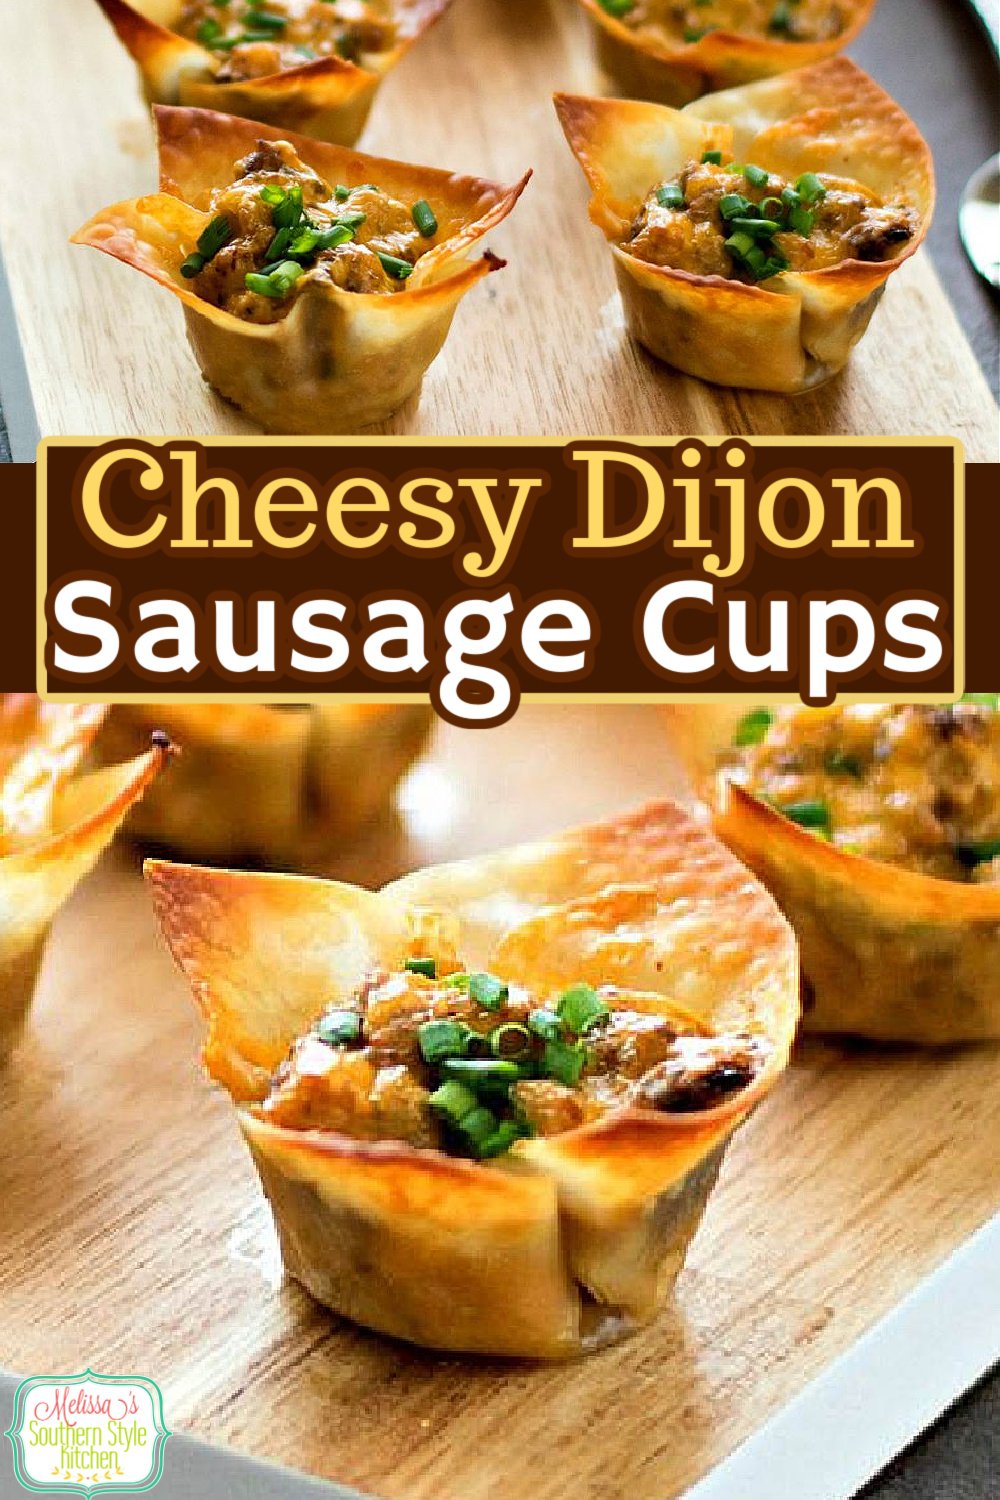 These easy Cheesy Dijon Sausage Cups are made using wonton wrappers for the crust. #sausagecups #sasuagerecipes #cheesysausagecups #wontoncups #sontonwrappers #sausagerecipes #cheesysausagecups #brunch #appetizers #recipes #southernfood #southernrecipes via @melissasssk